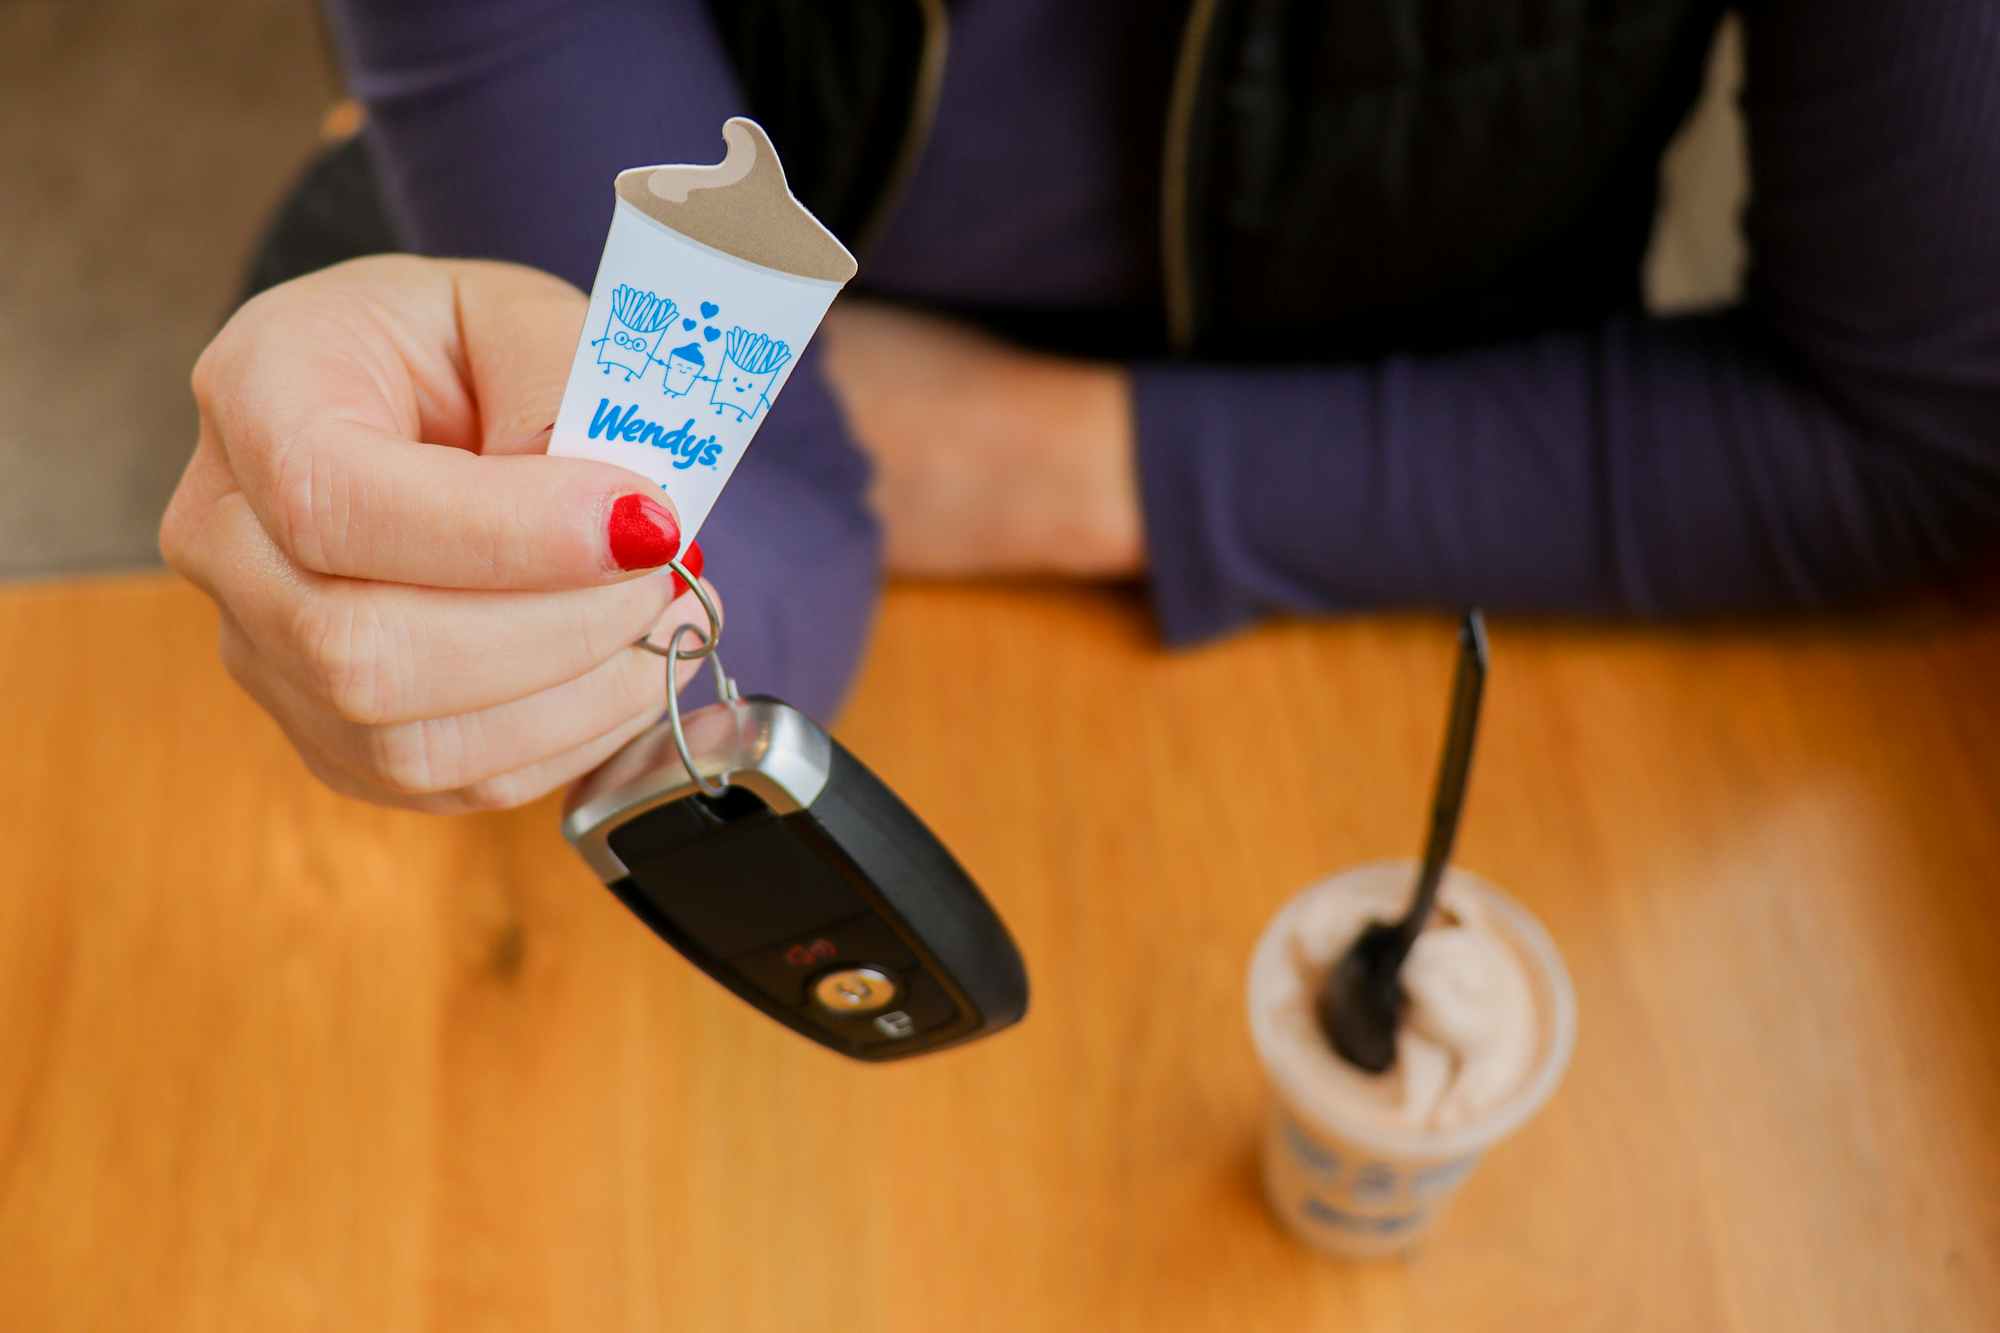 a person holding up a wendys frosty key tag